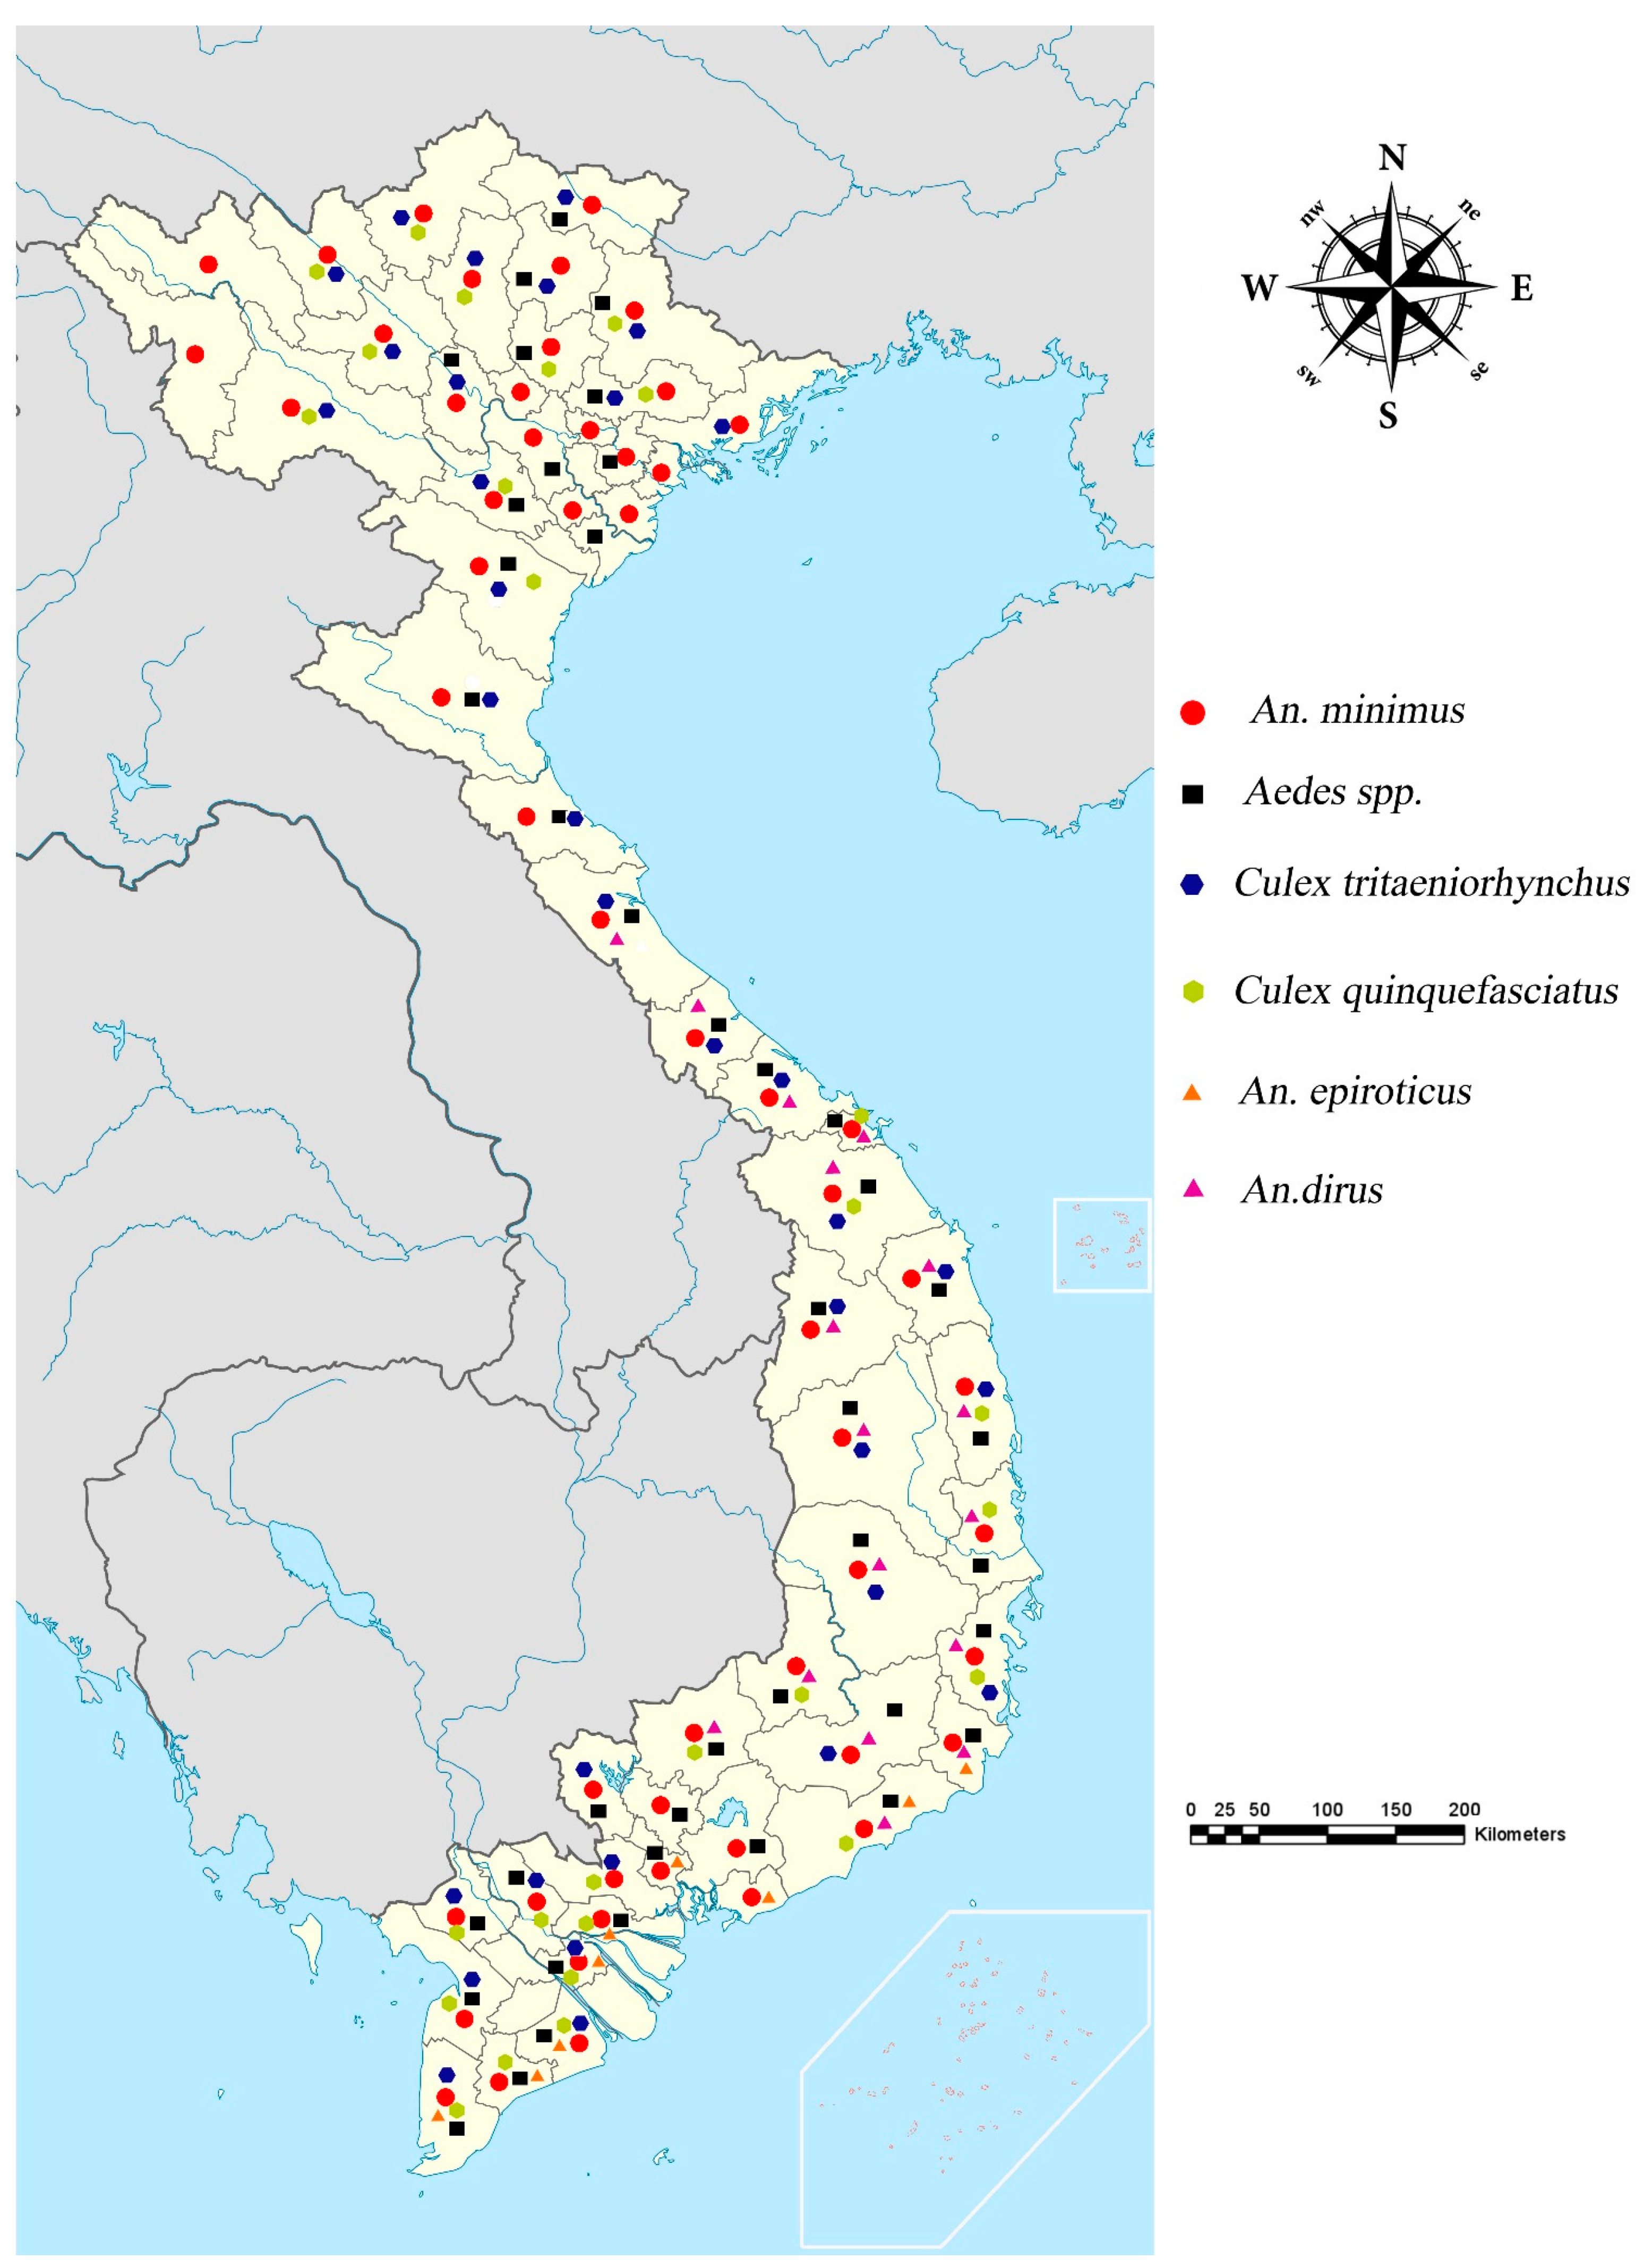 Insects | Free Full-Text | Mosquitoes and Mosquito-Borne Diseases in Vietnam